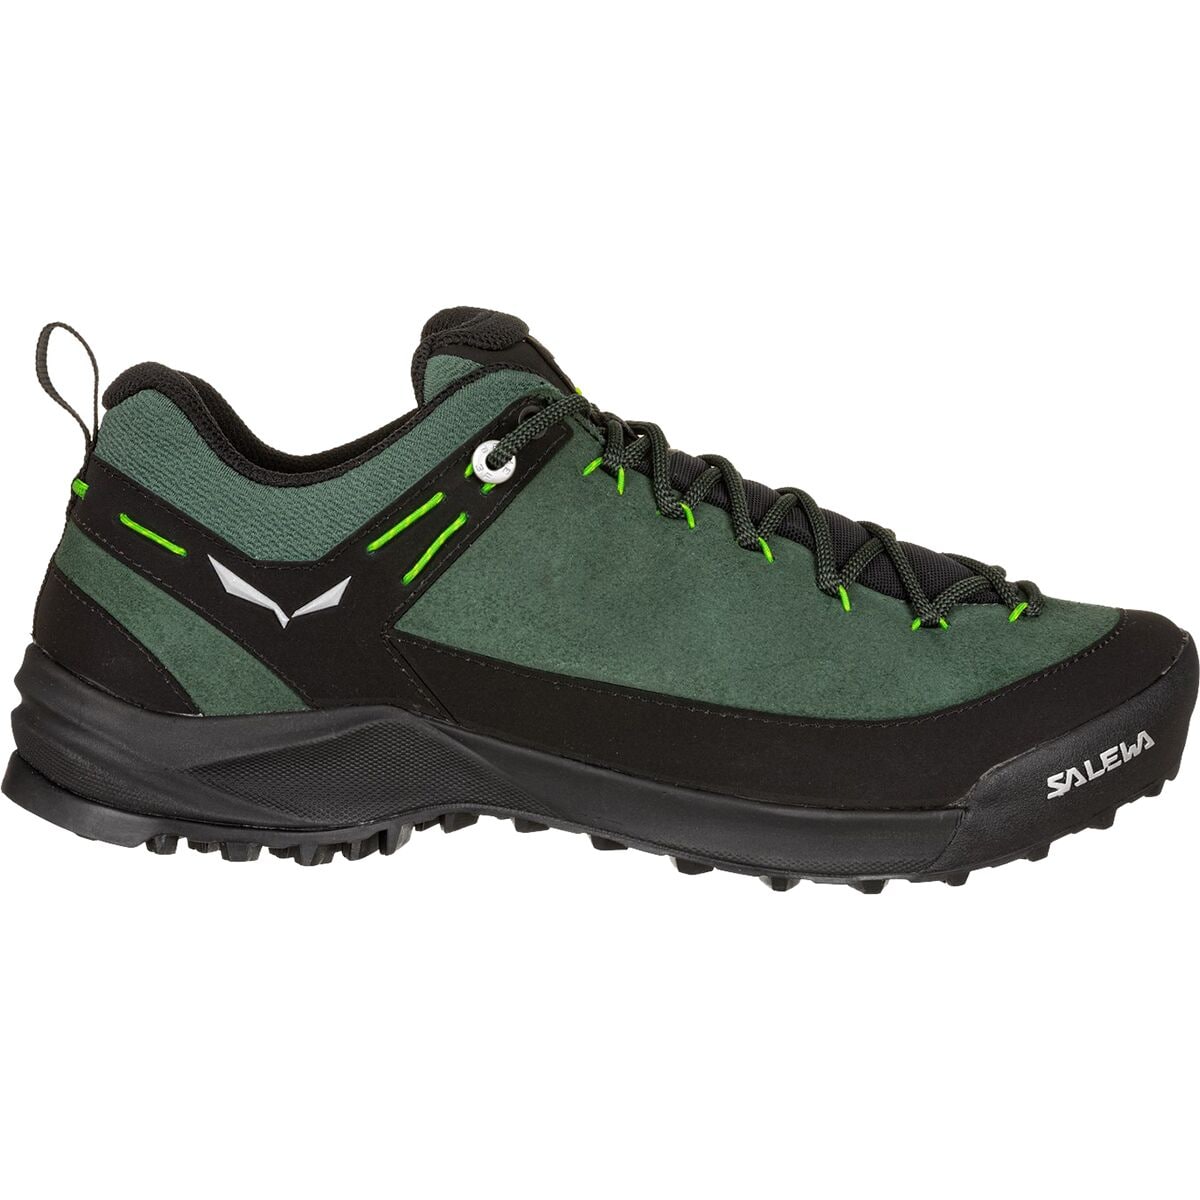 Wildfire Leather Hiking Shoe - Men